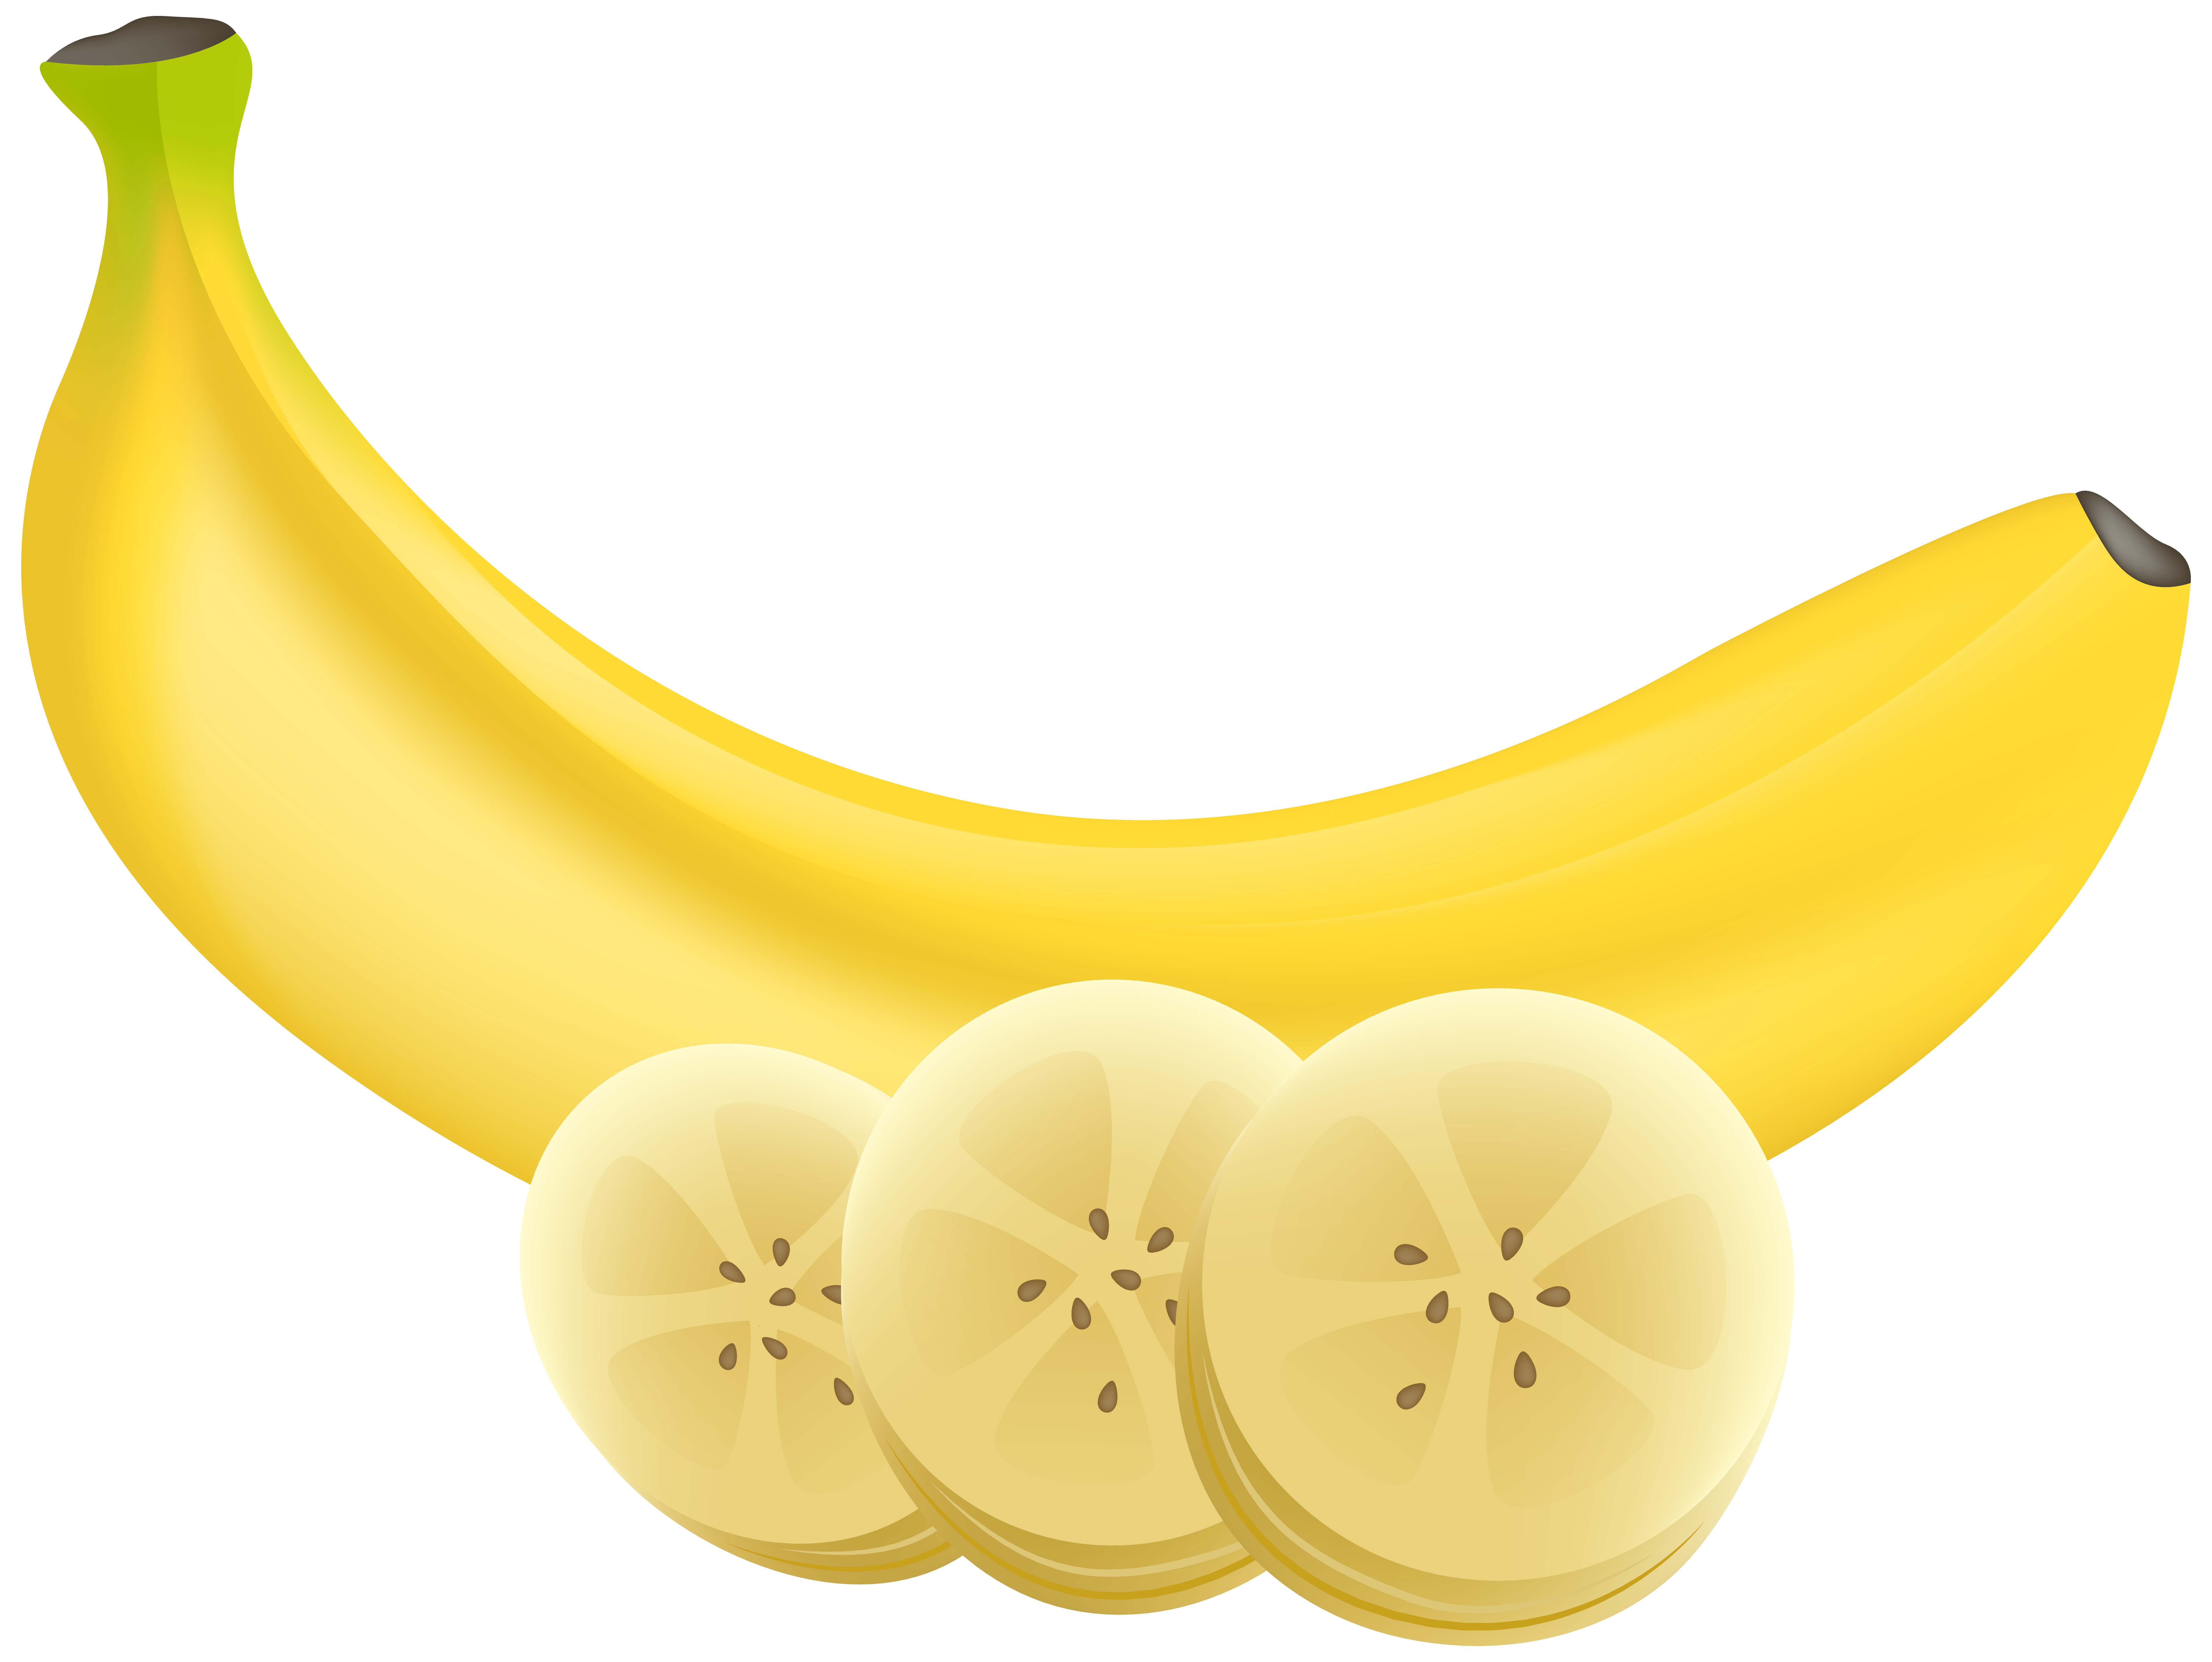 Banana and Slices Transparent PNG Clip Art Image | Gallery Yopriceville